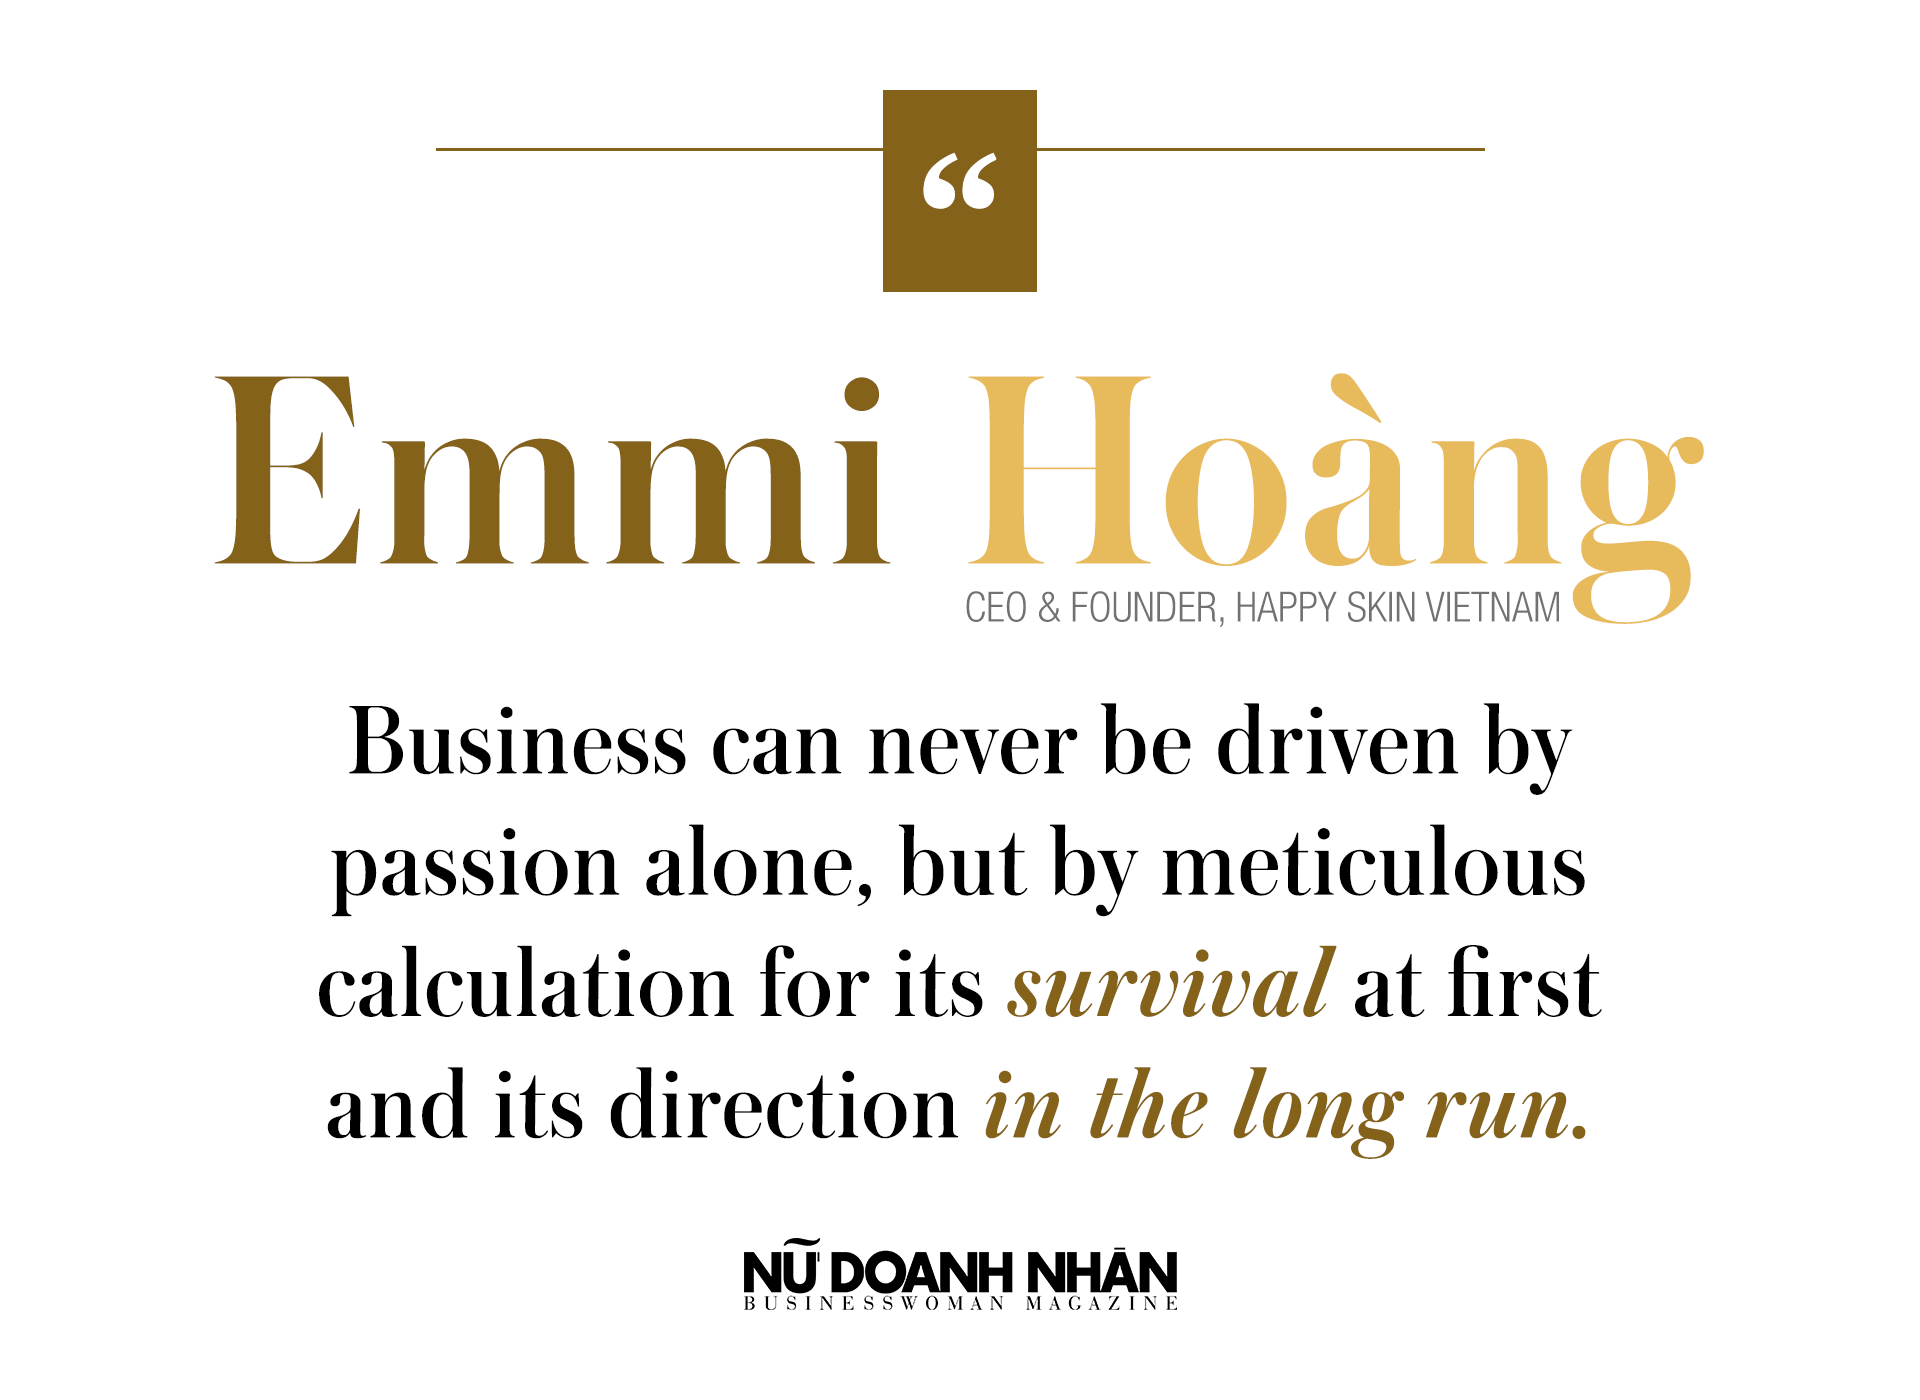 Emmi Hoàng share a story of joy and passion